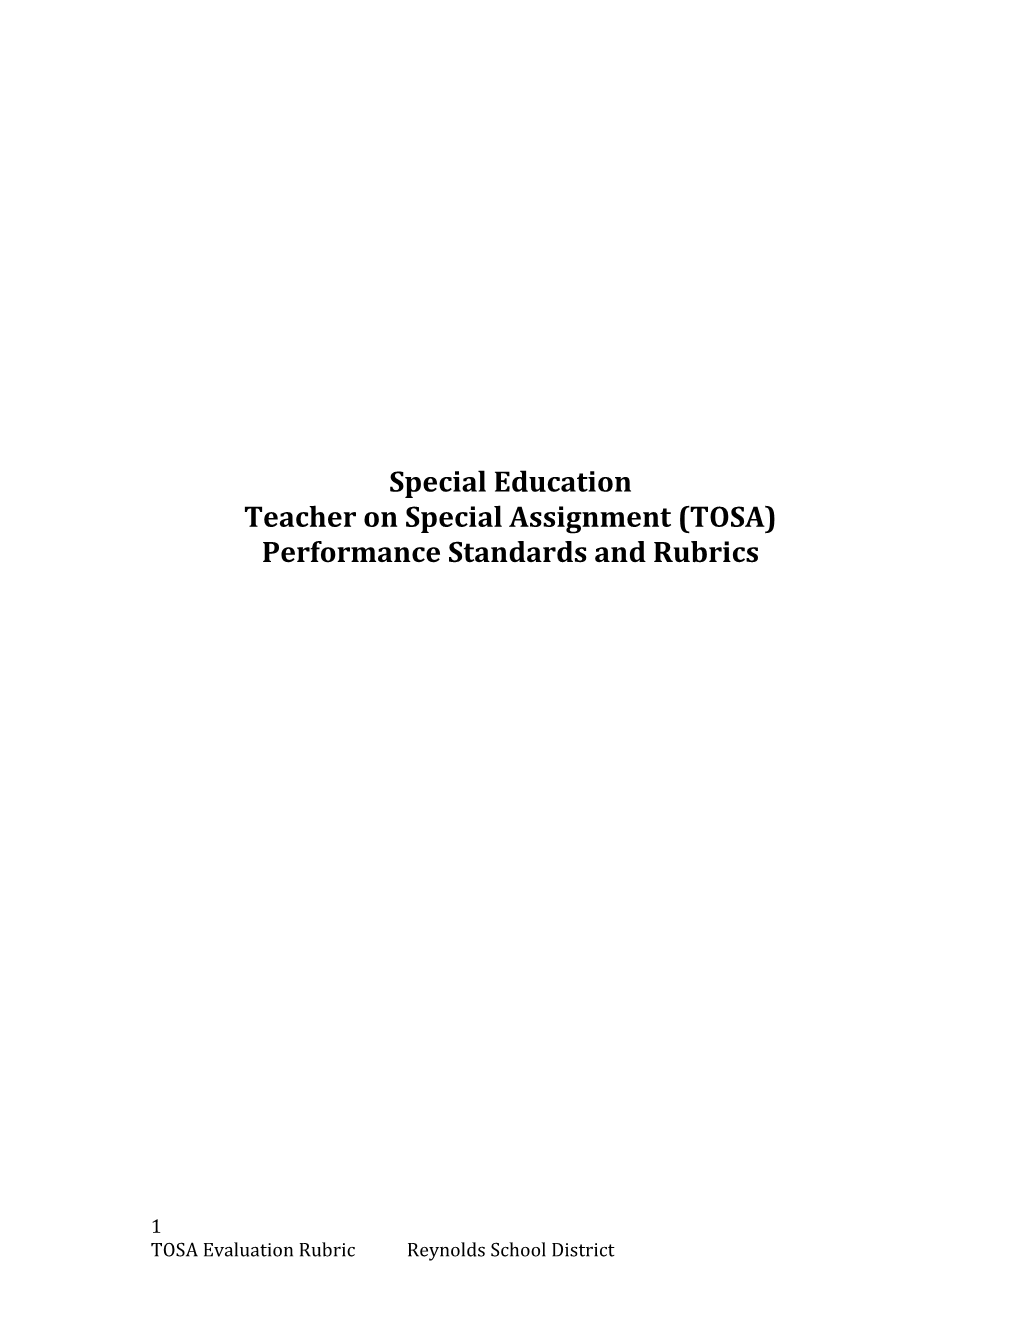 Teacher on Special Assignment (TOSA)